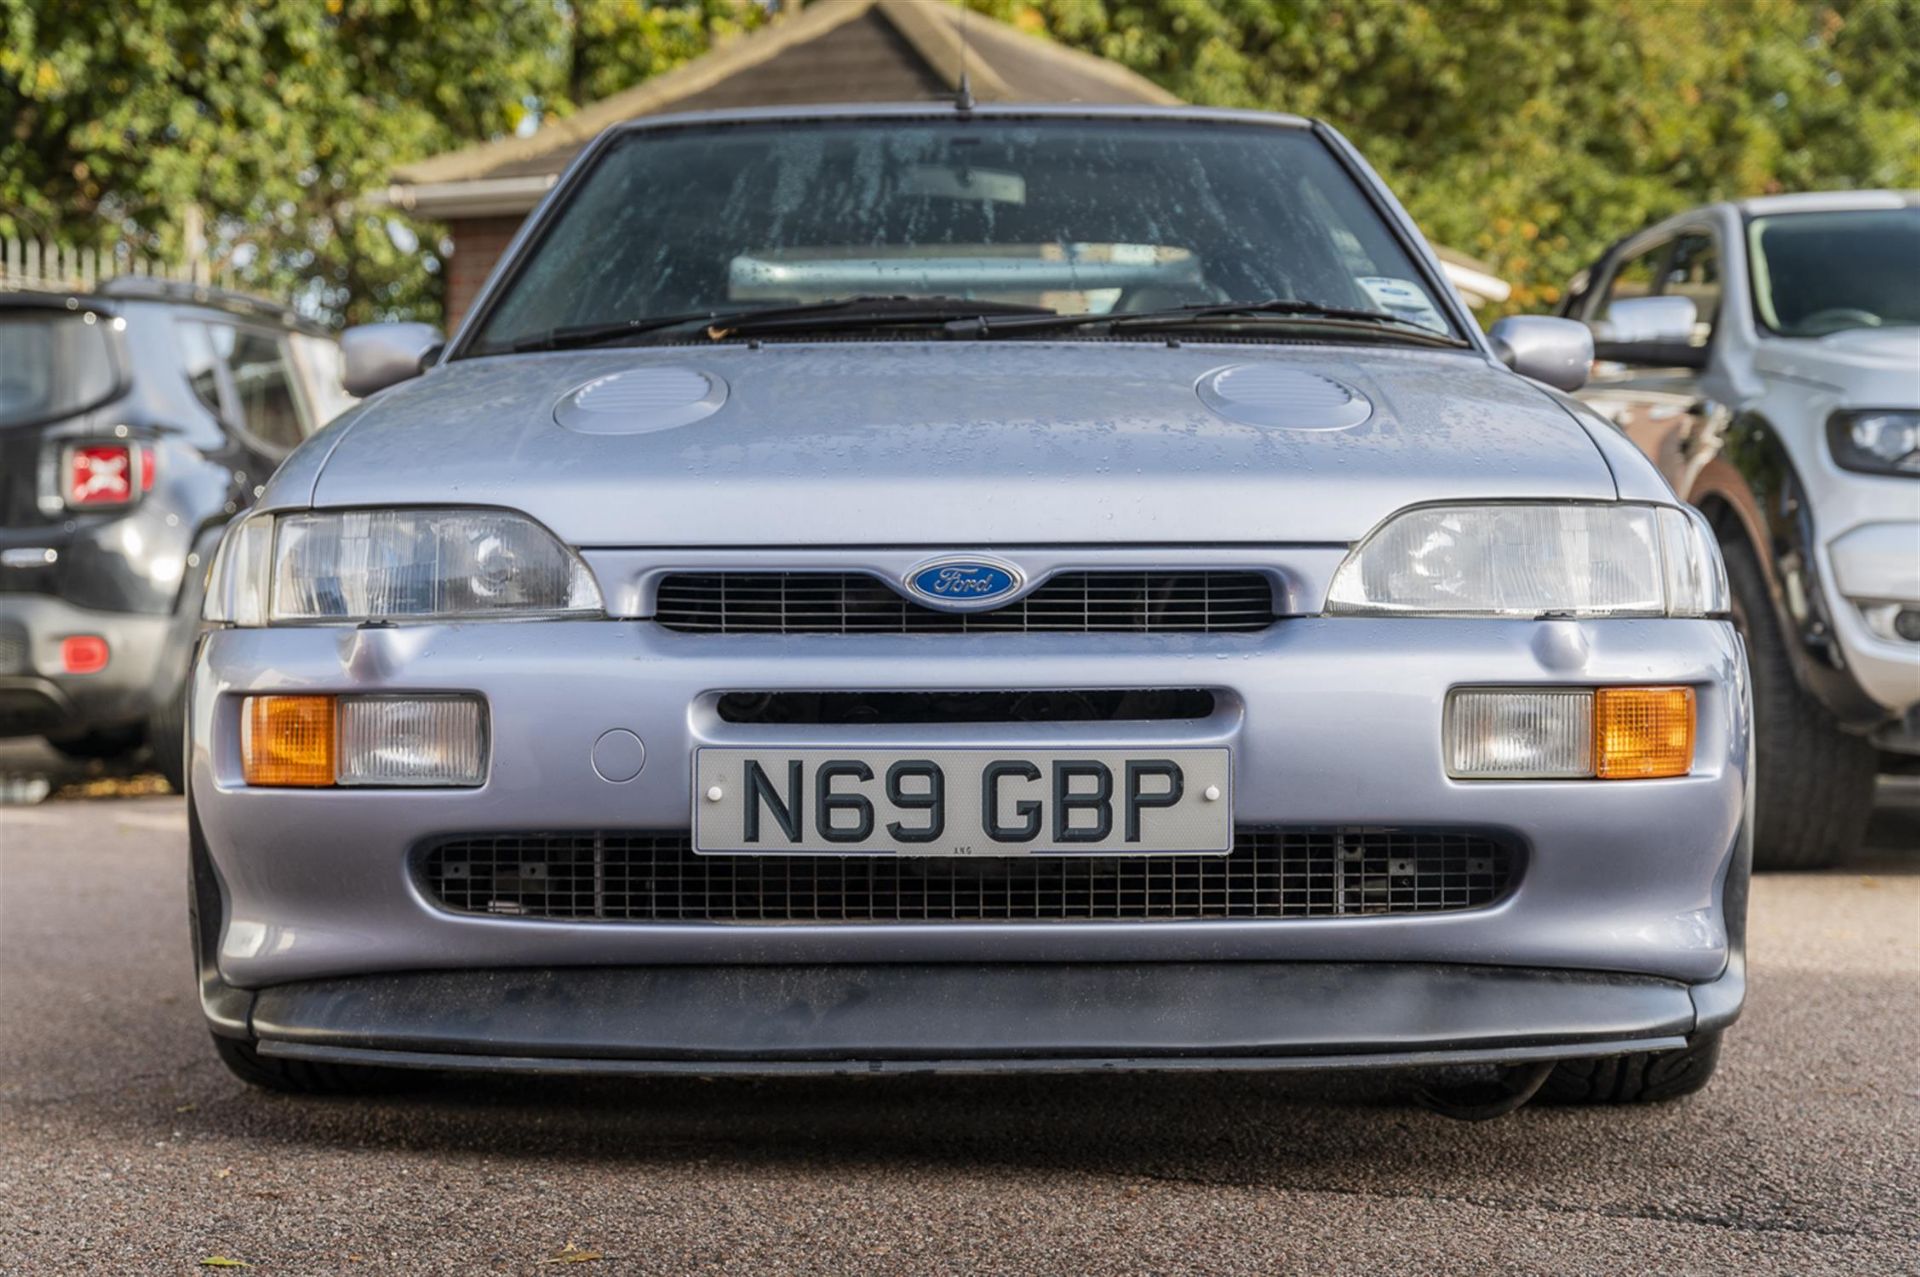 1996 Ford Escort RS Cosworth Lux - Image 5 of 10